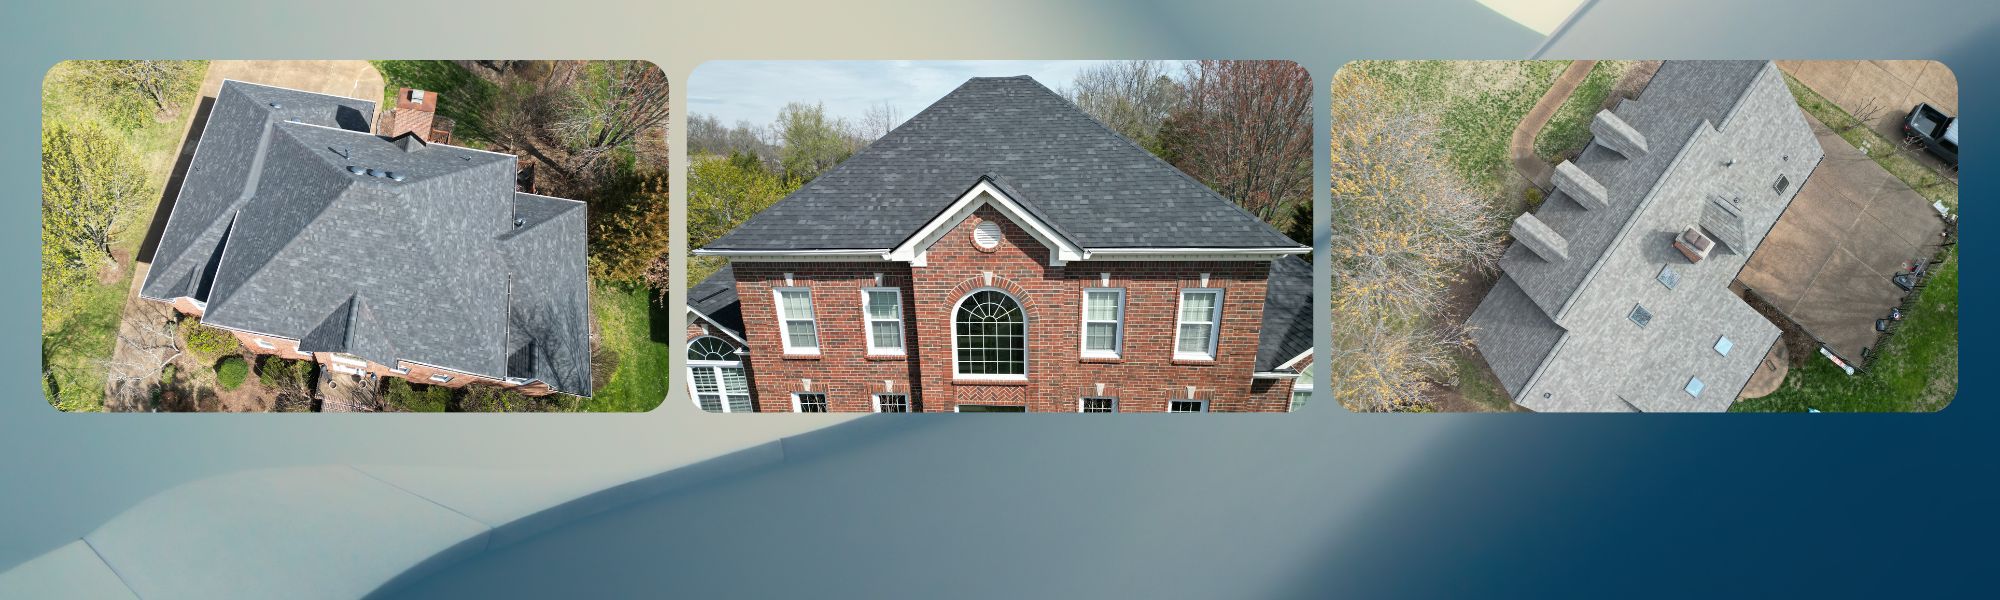 RRR Residential Roofers Image 2